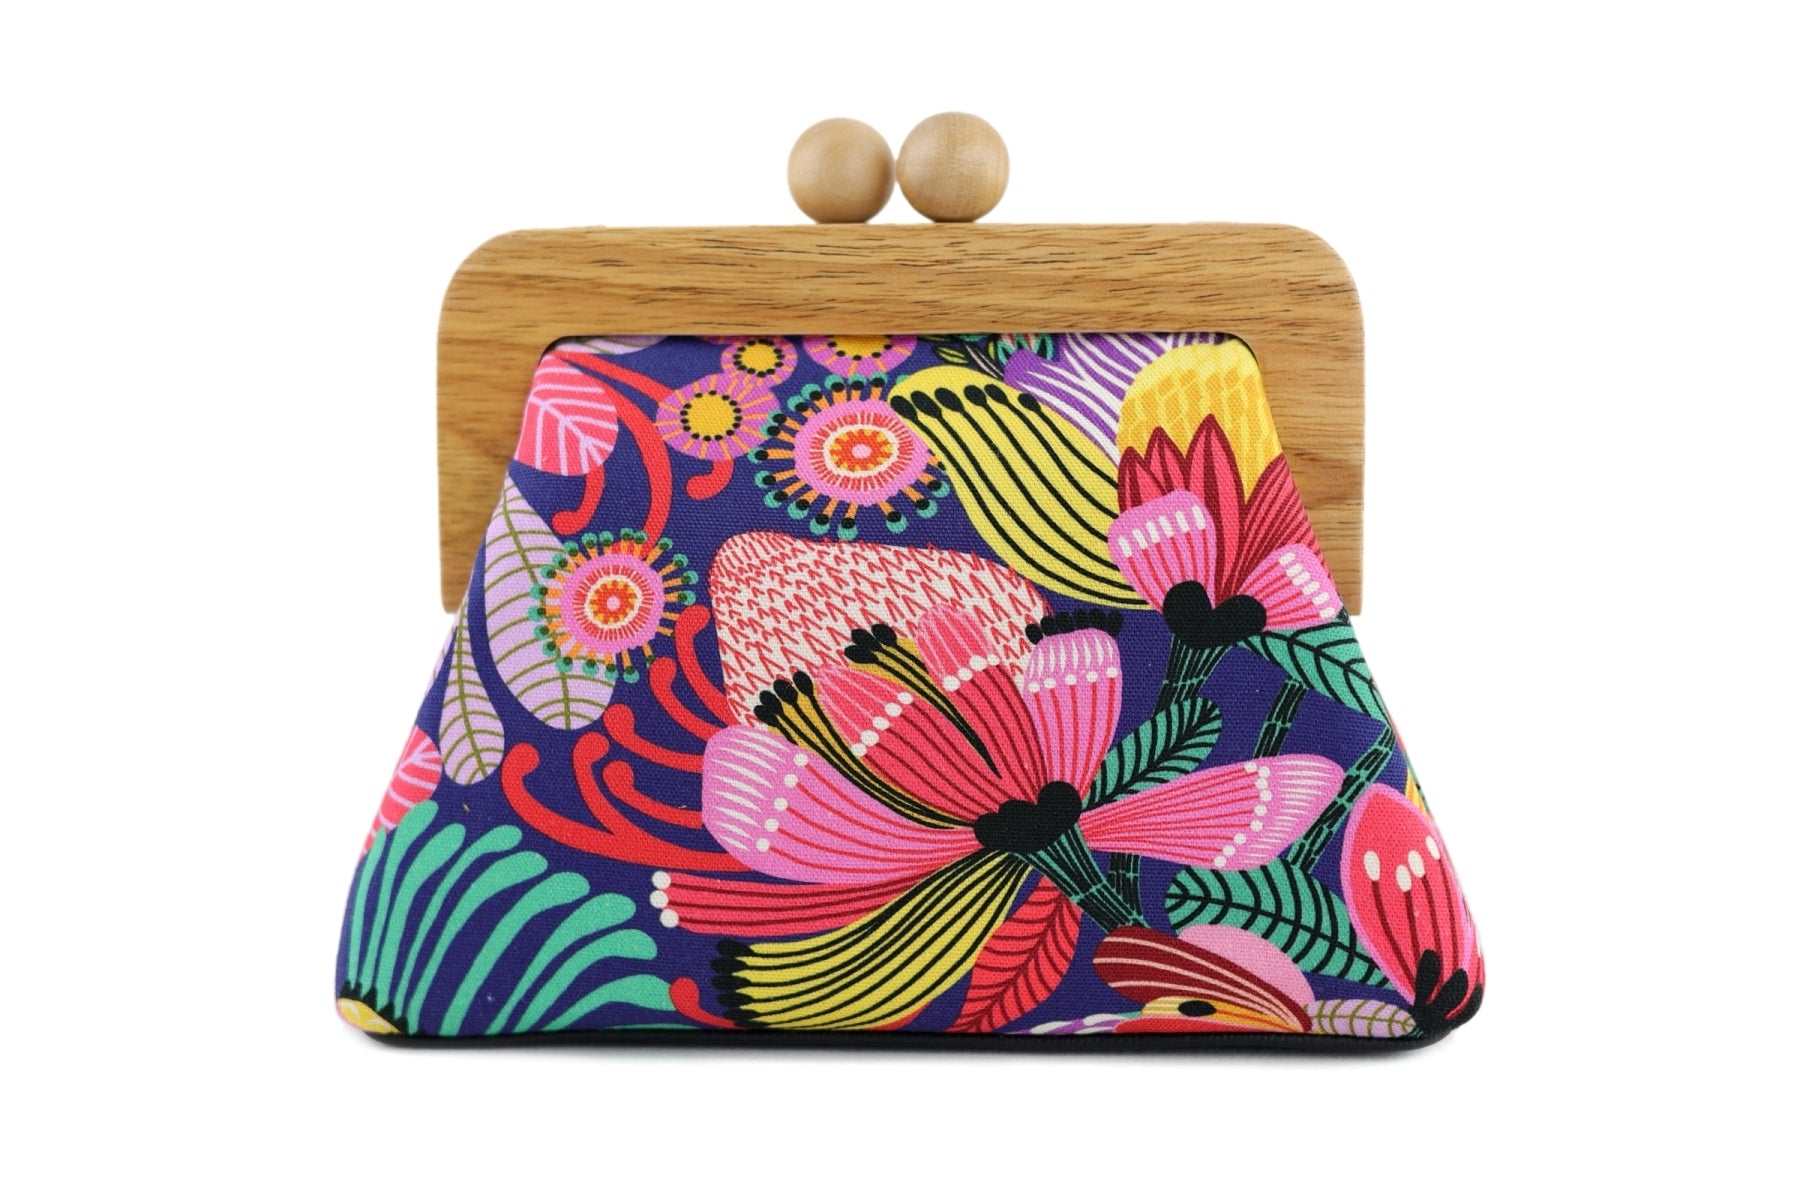 Wild Protea Colorful Flower Clutch with Leather Strap | PINK OASIS